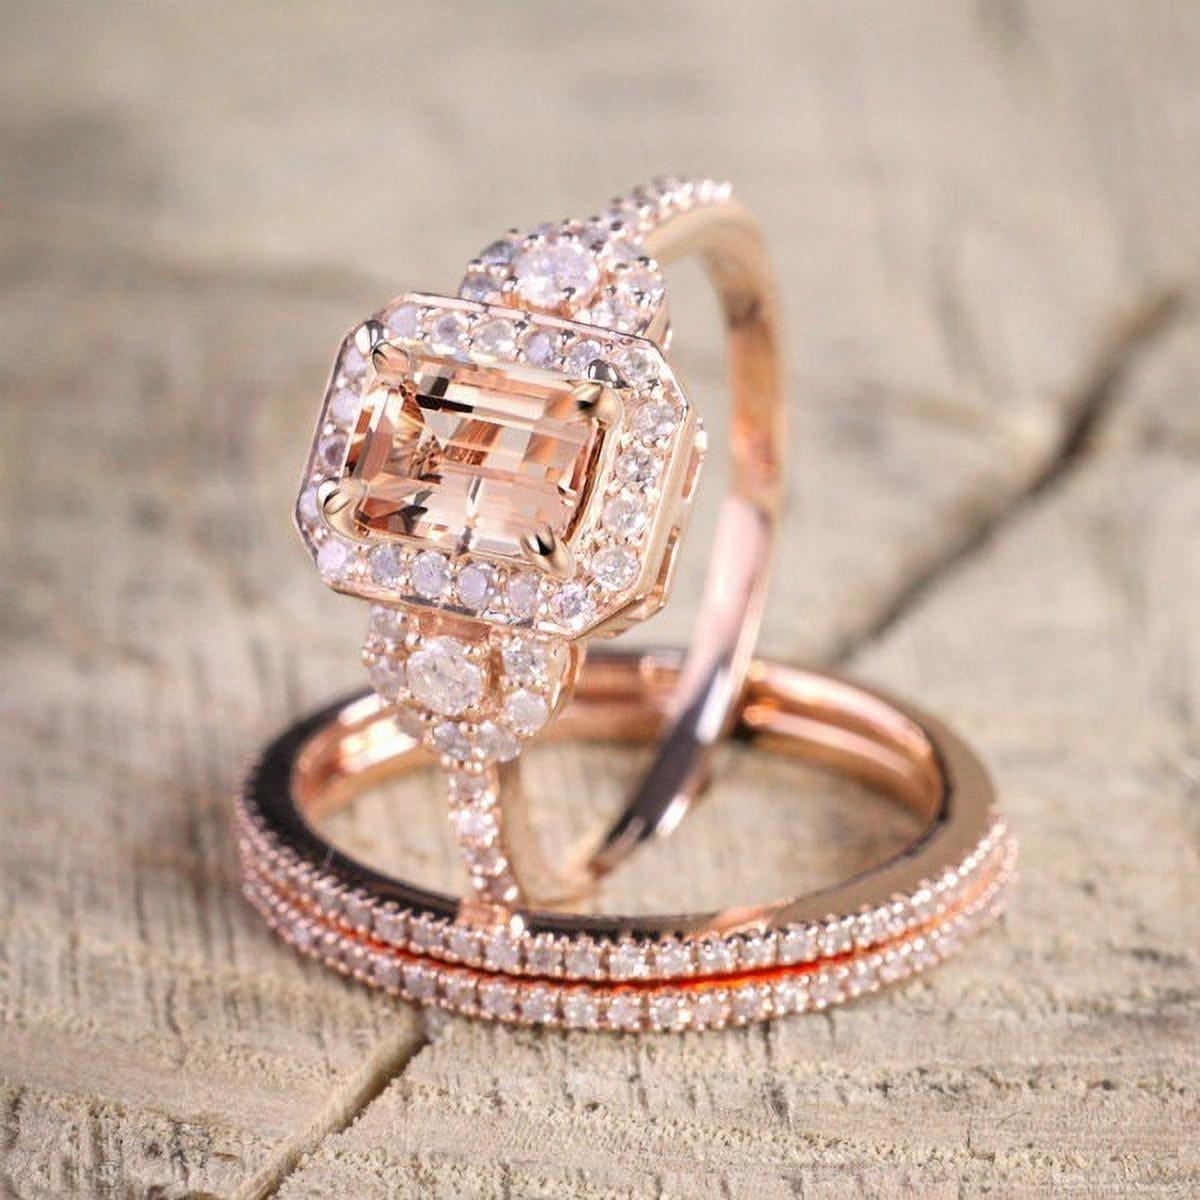 An Amazing Crafted Rose Gold Diamond Ladies Ring